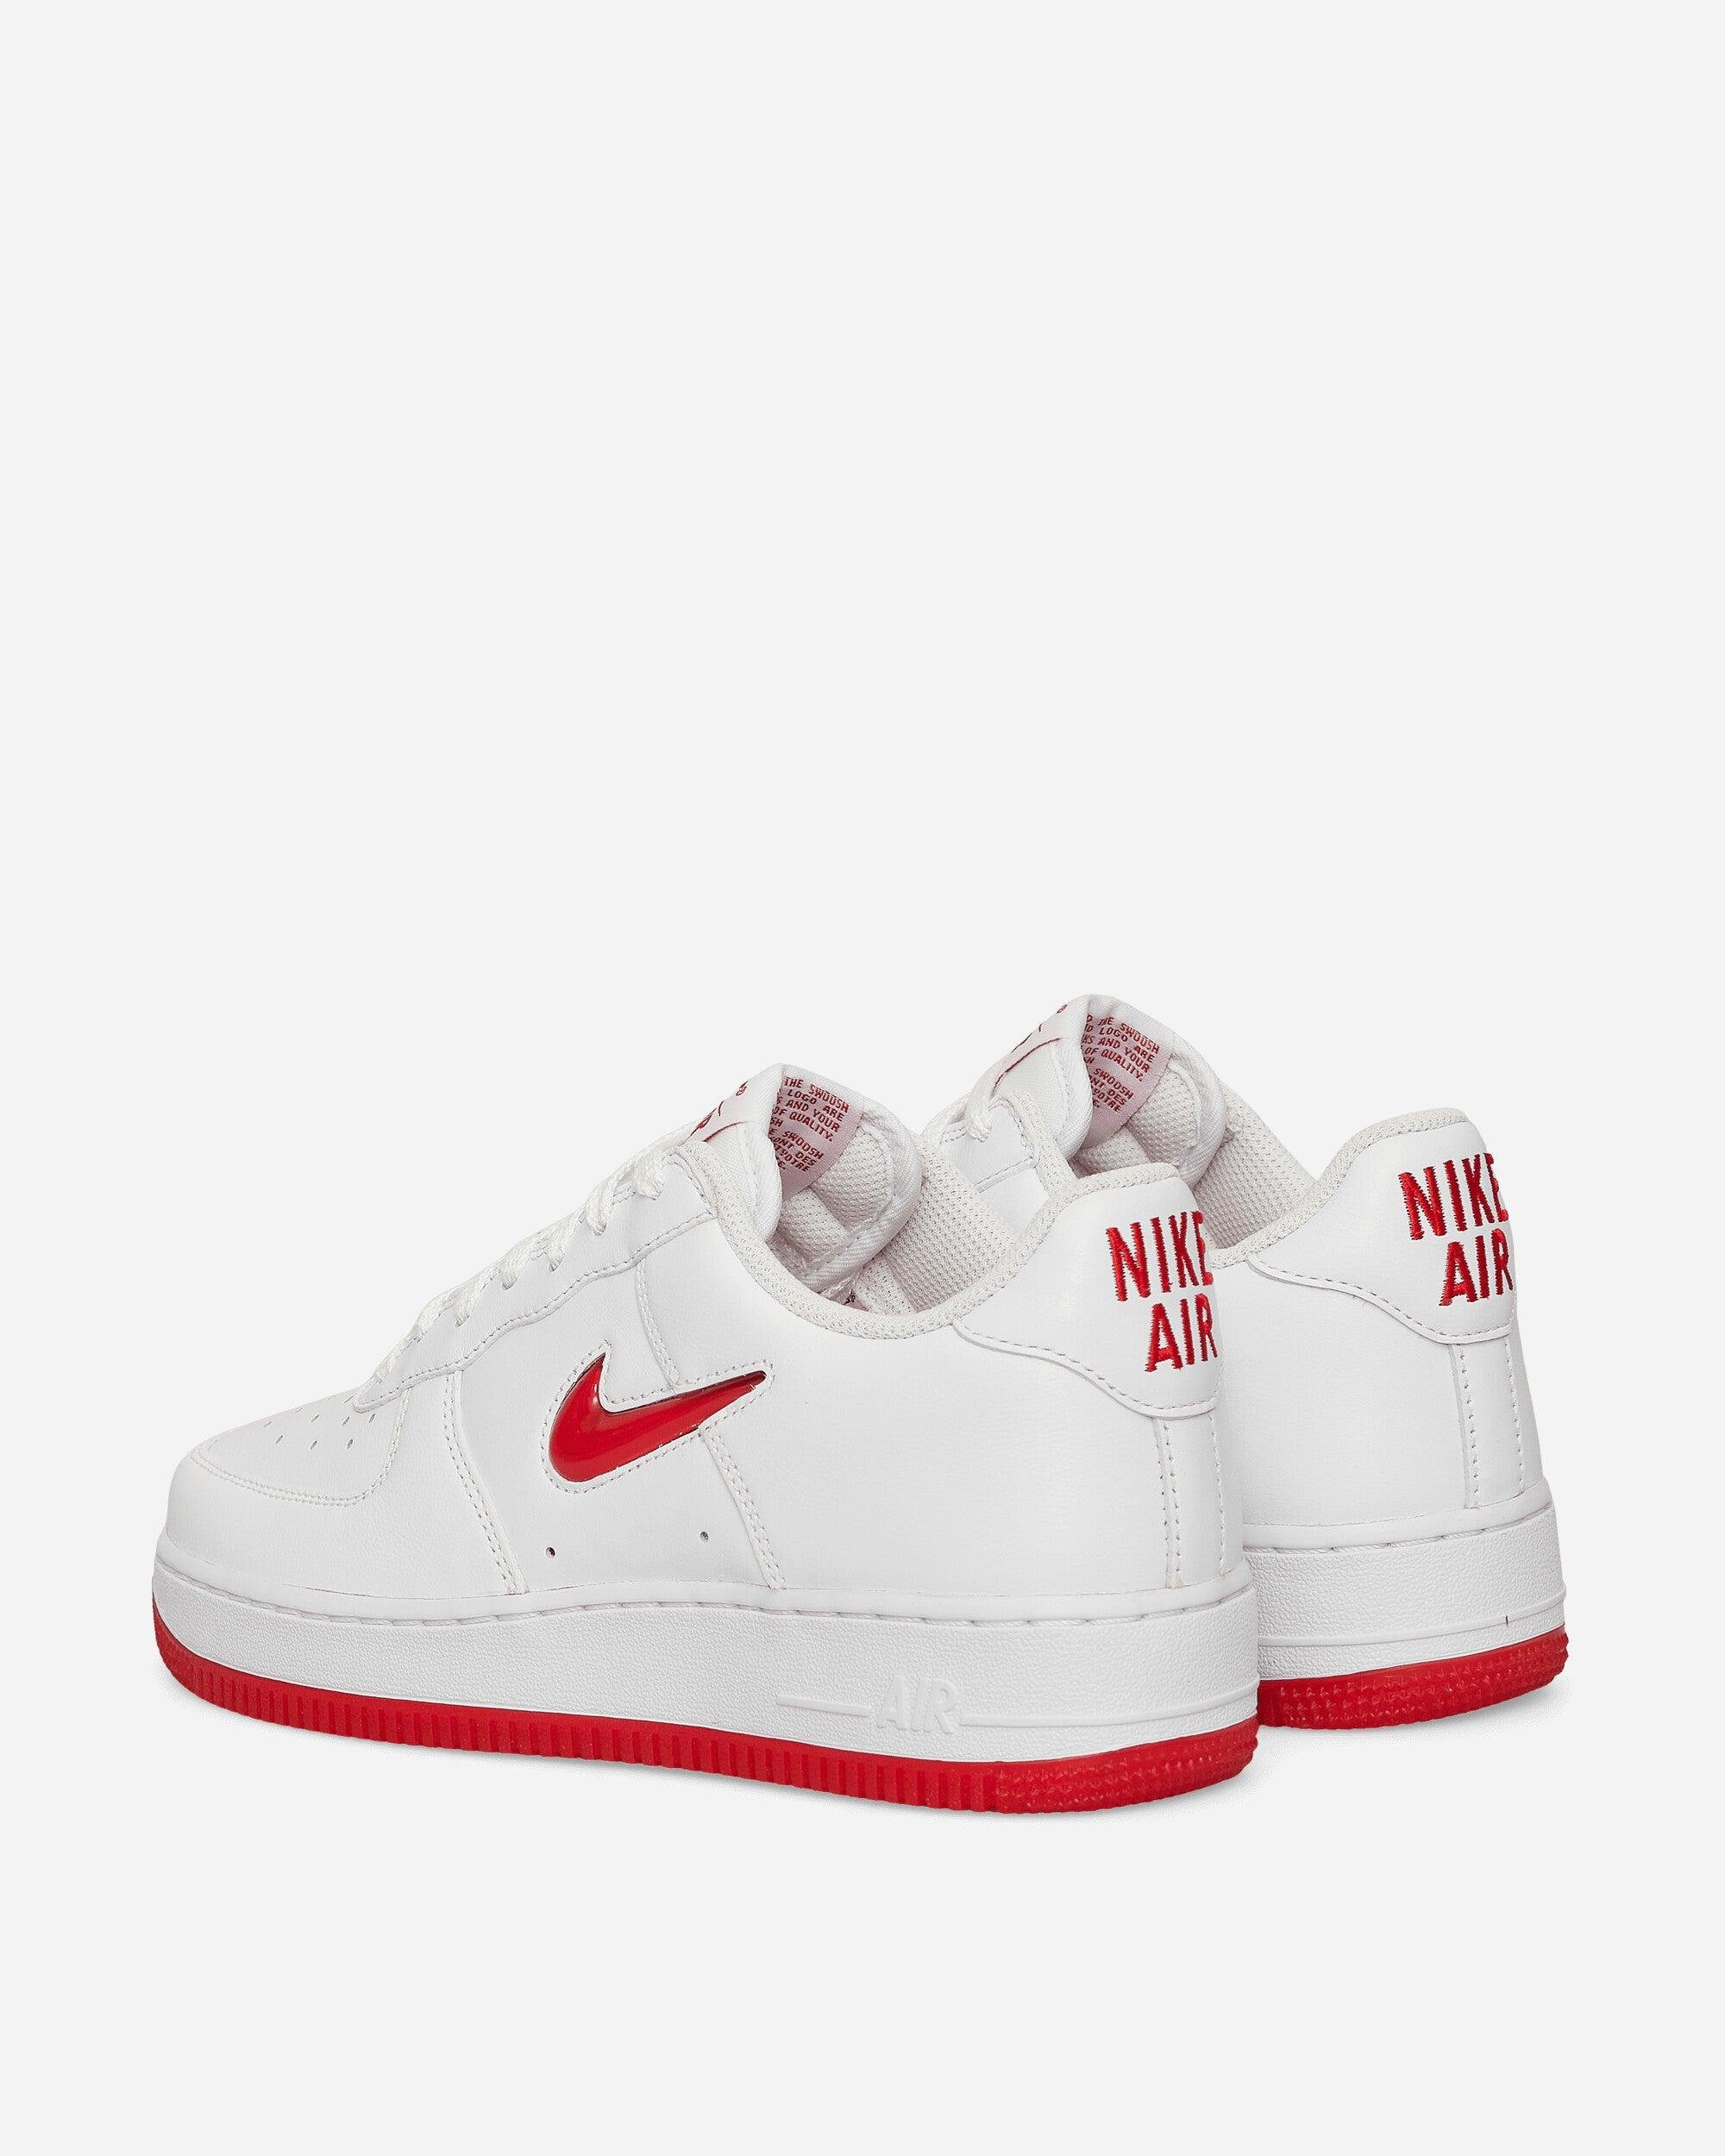 Nike Air Force 1 Low Retro Sneakers White / University Red for Men | Lyst